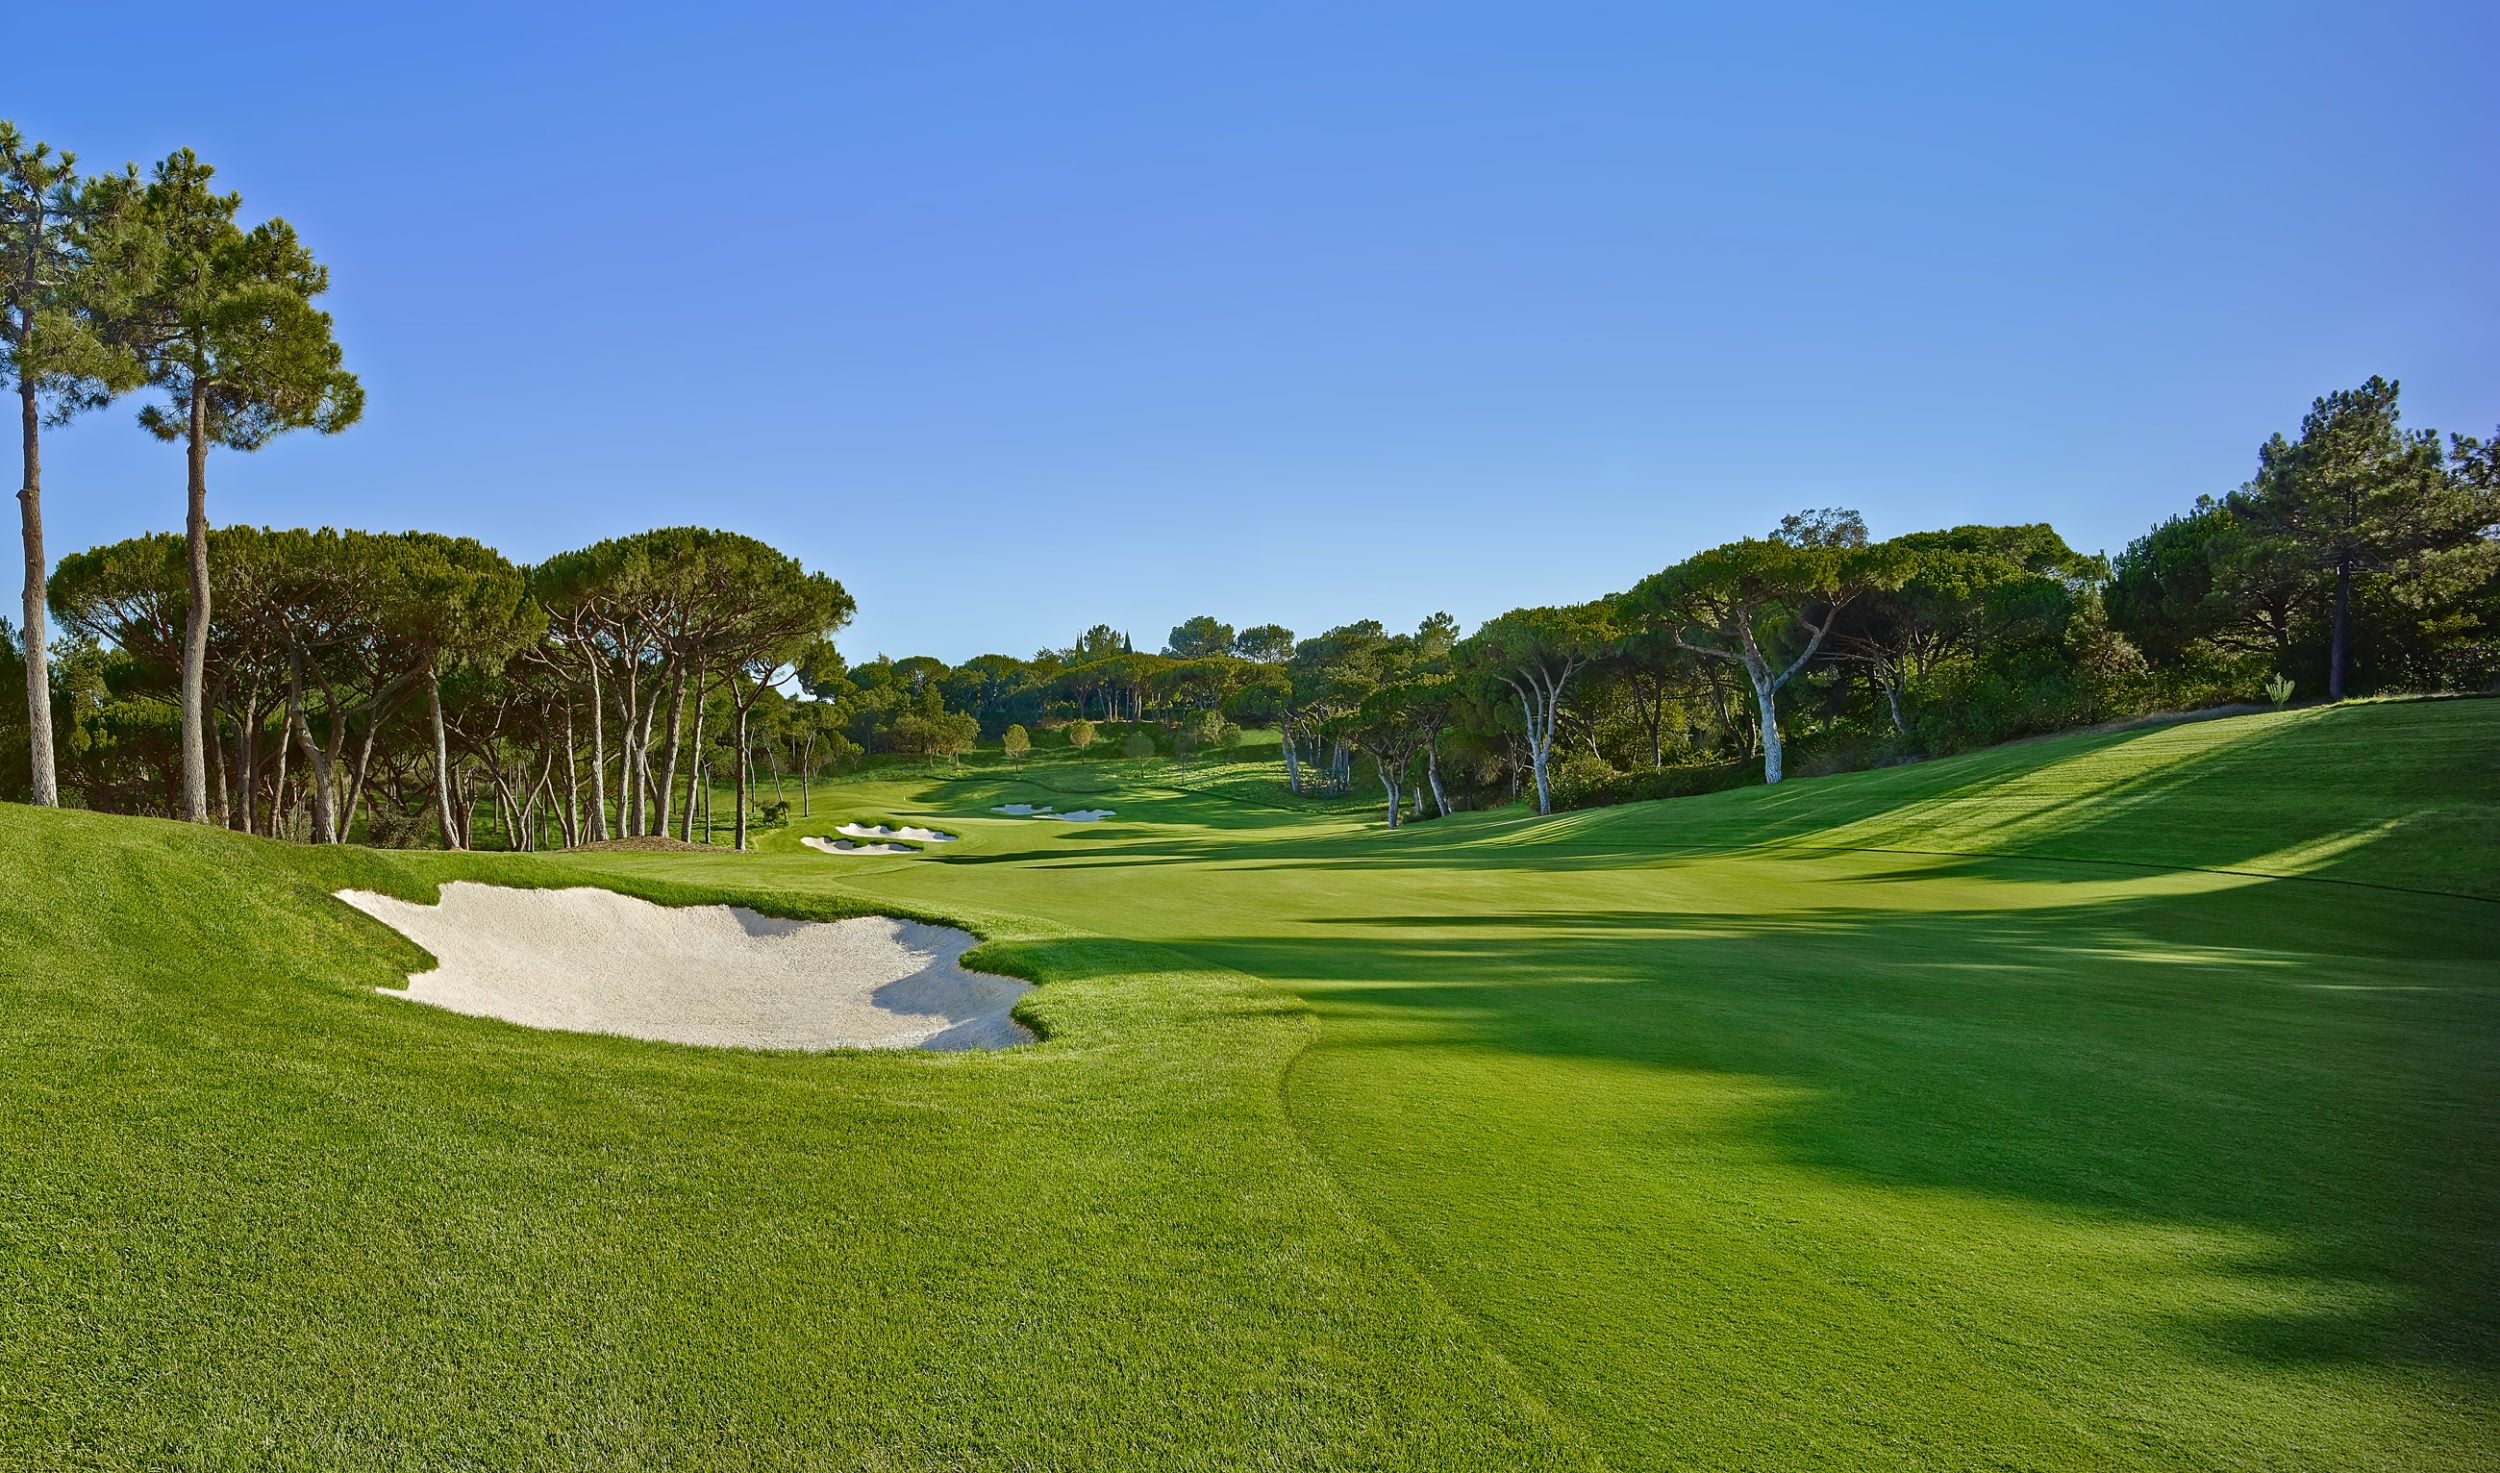 Displaying a natural valley on The North Course, Quinta do Lago, Algarve, Portugal